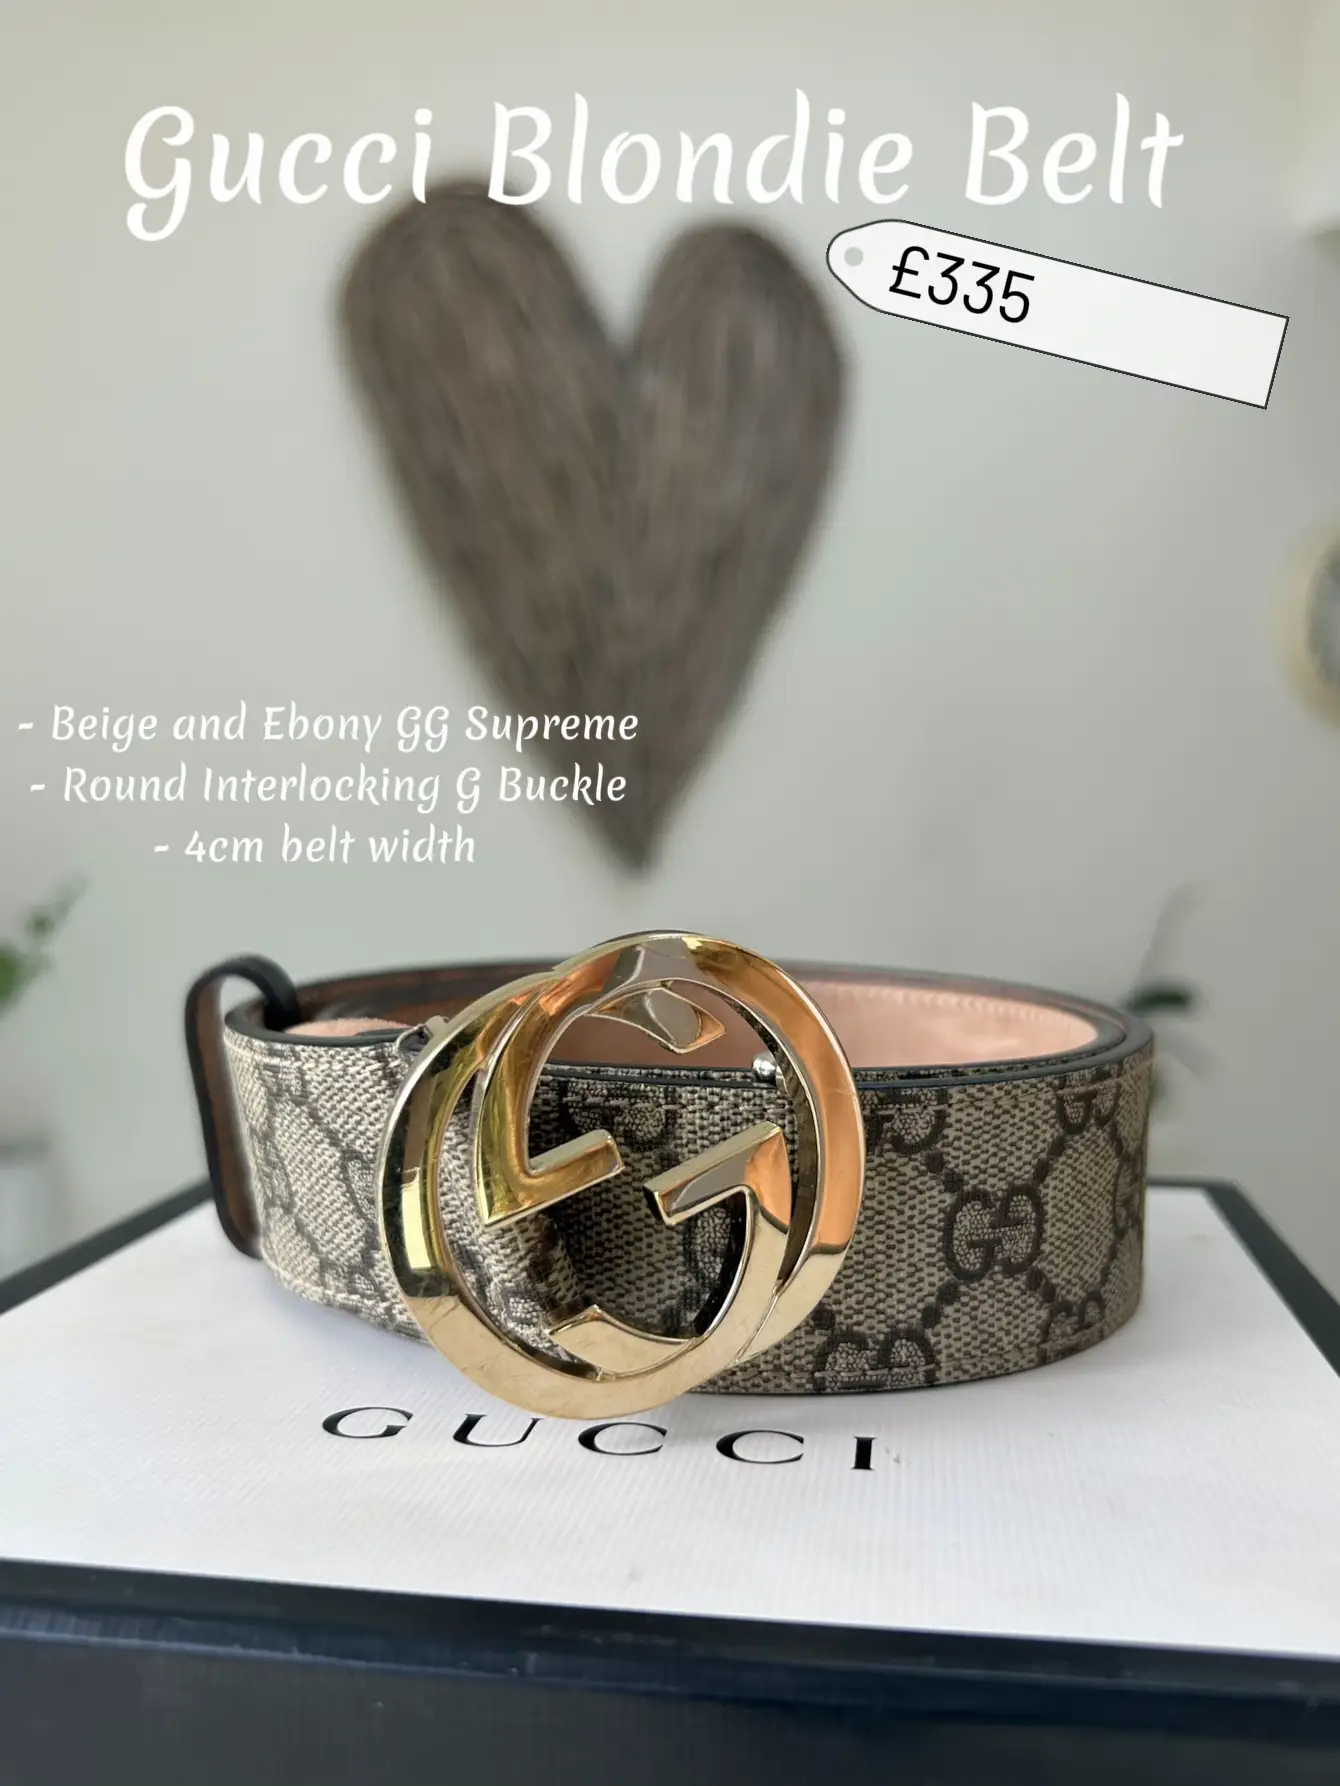 GUCCI REVERSIBLE GG BELT REVIEW & STYLING // LUXURY DESIGNER 2021